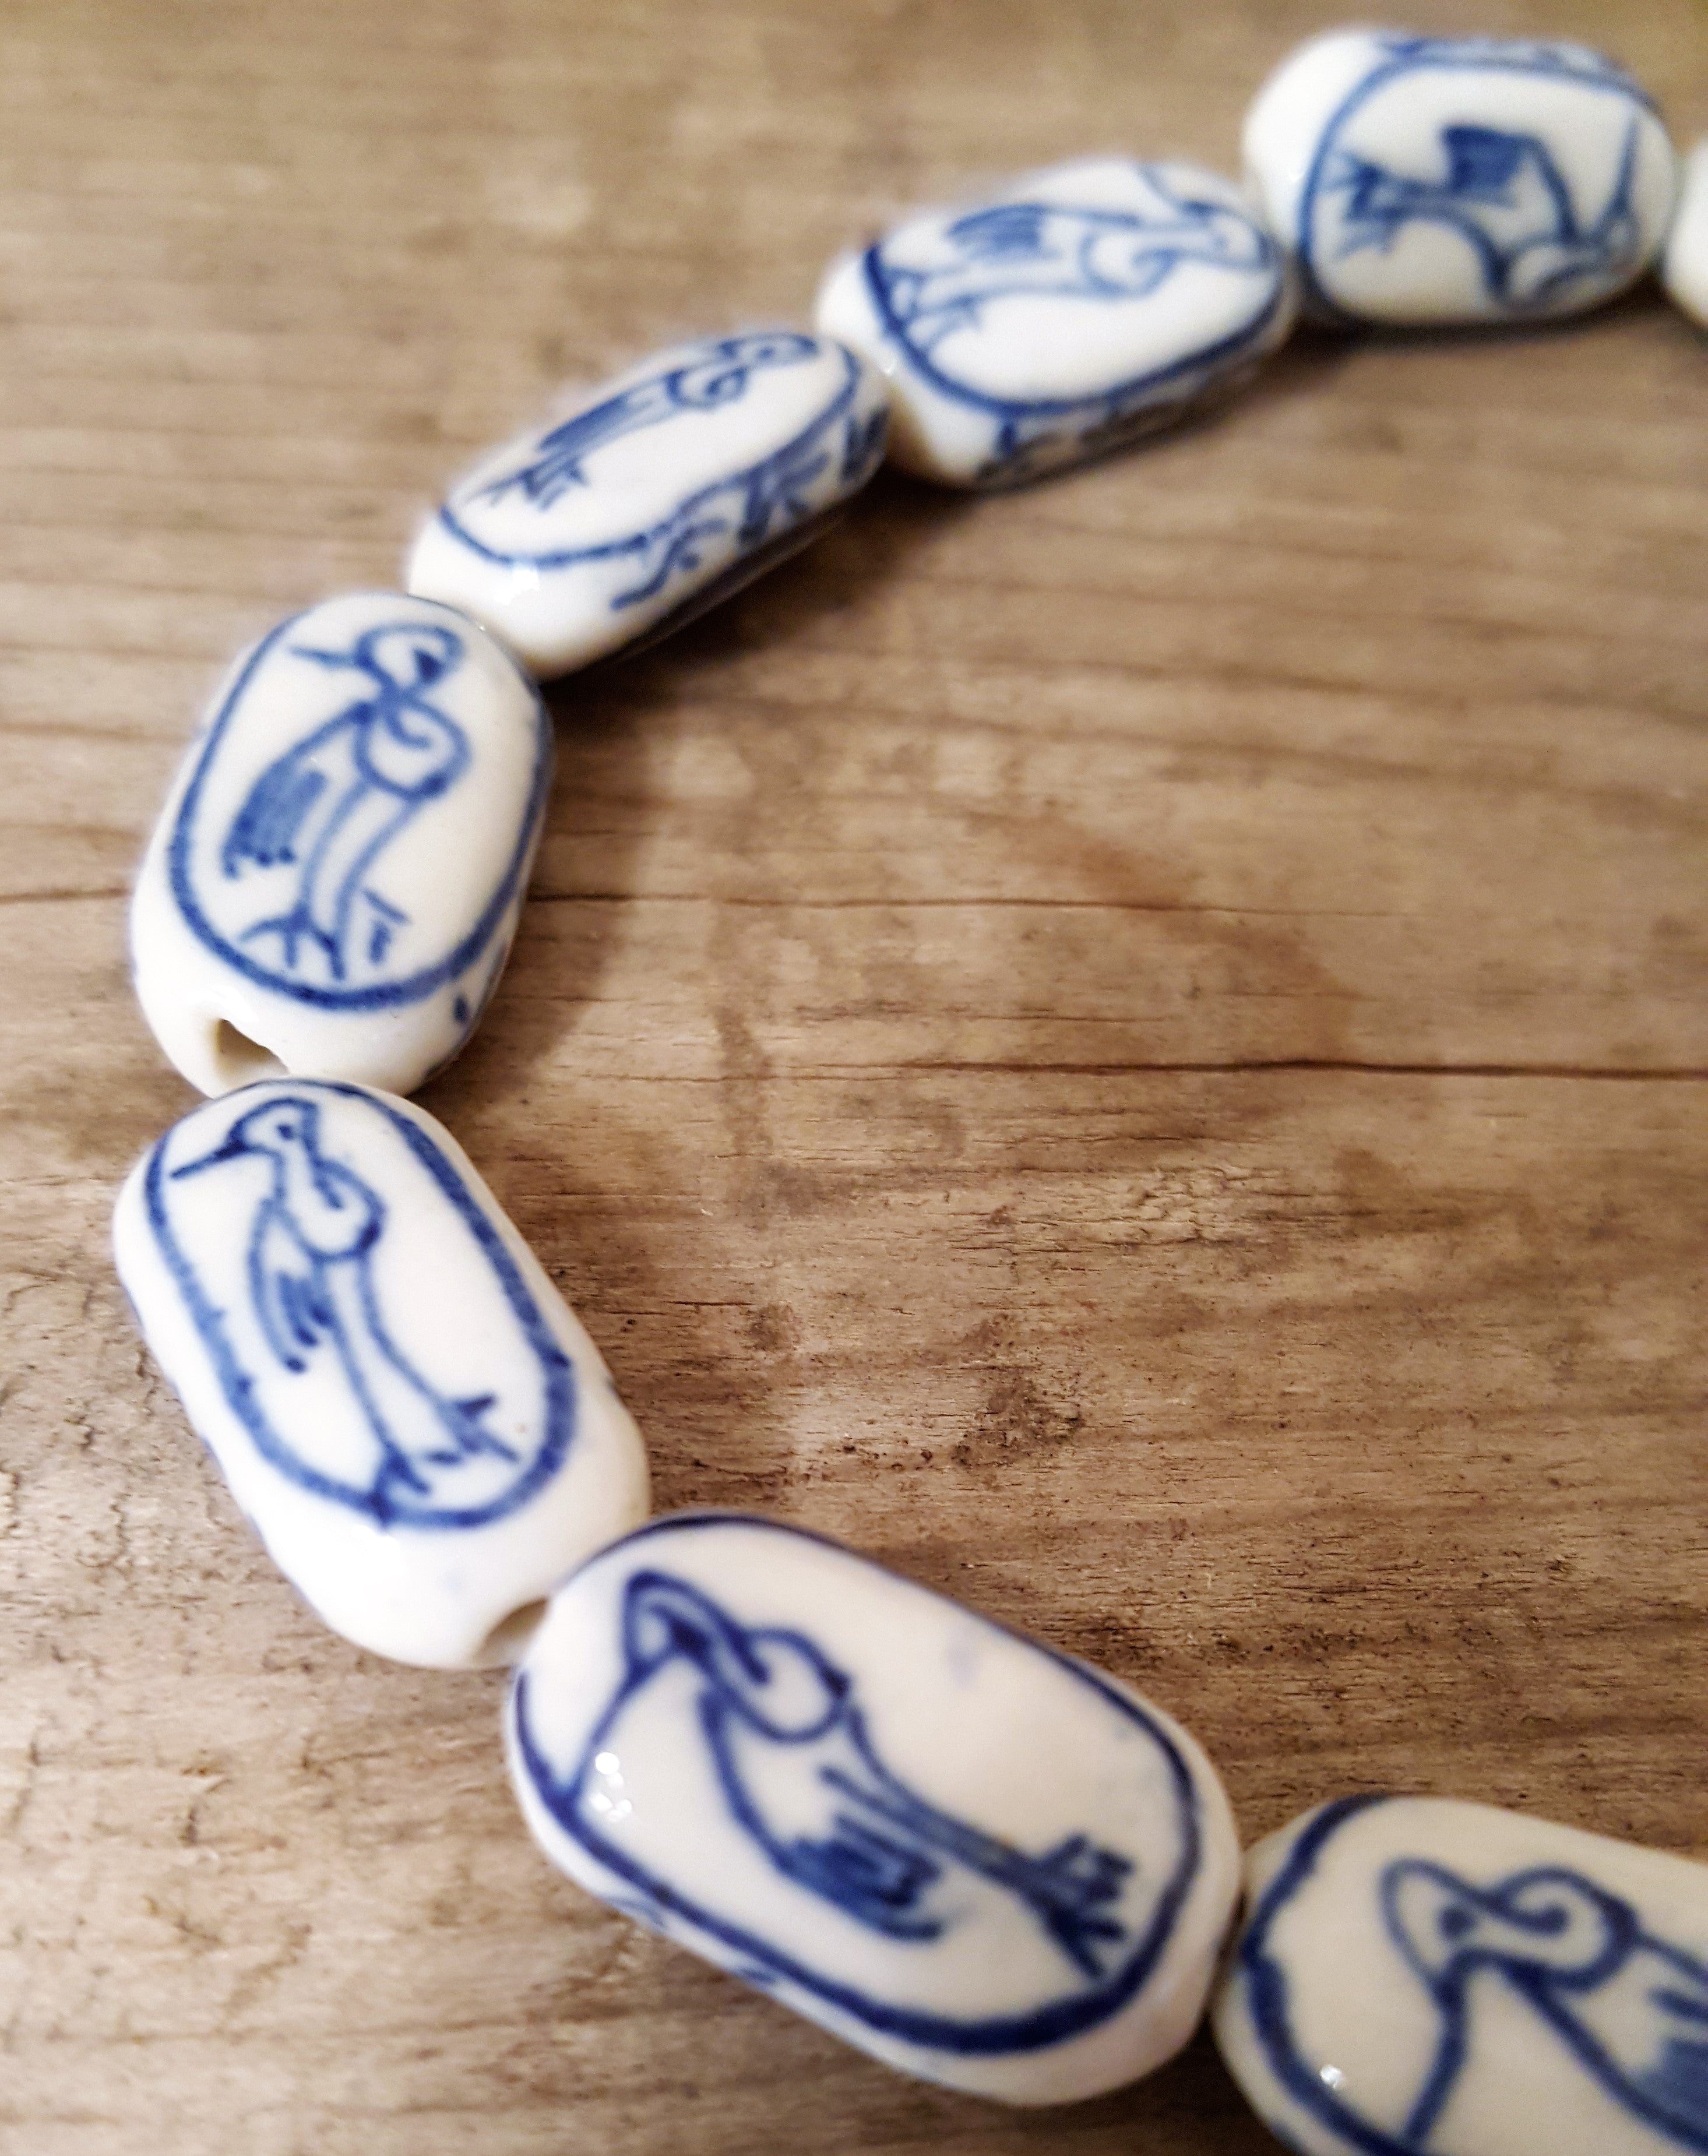 Hand painted navy blue and white beads Porcelain with Asian Loon Bird